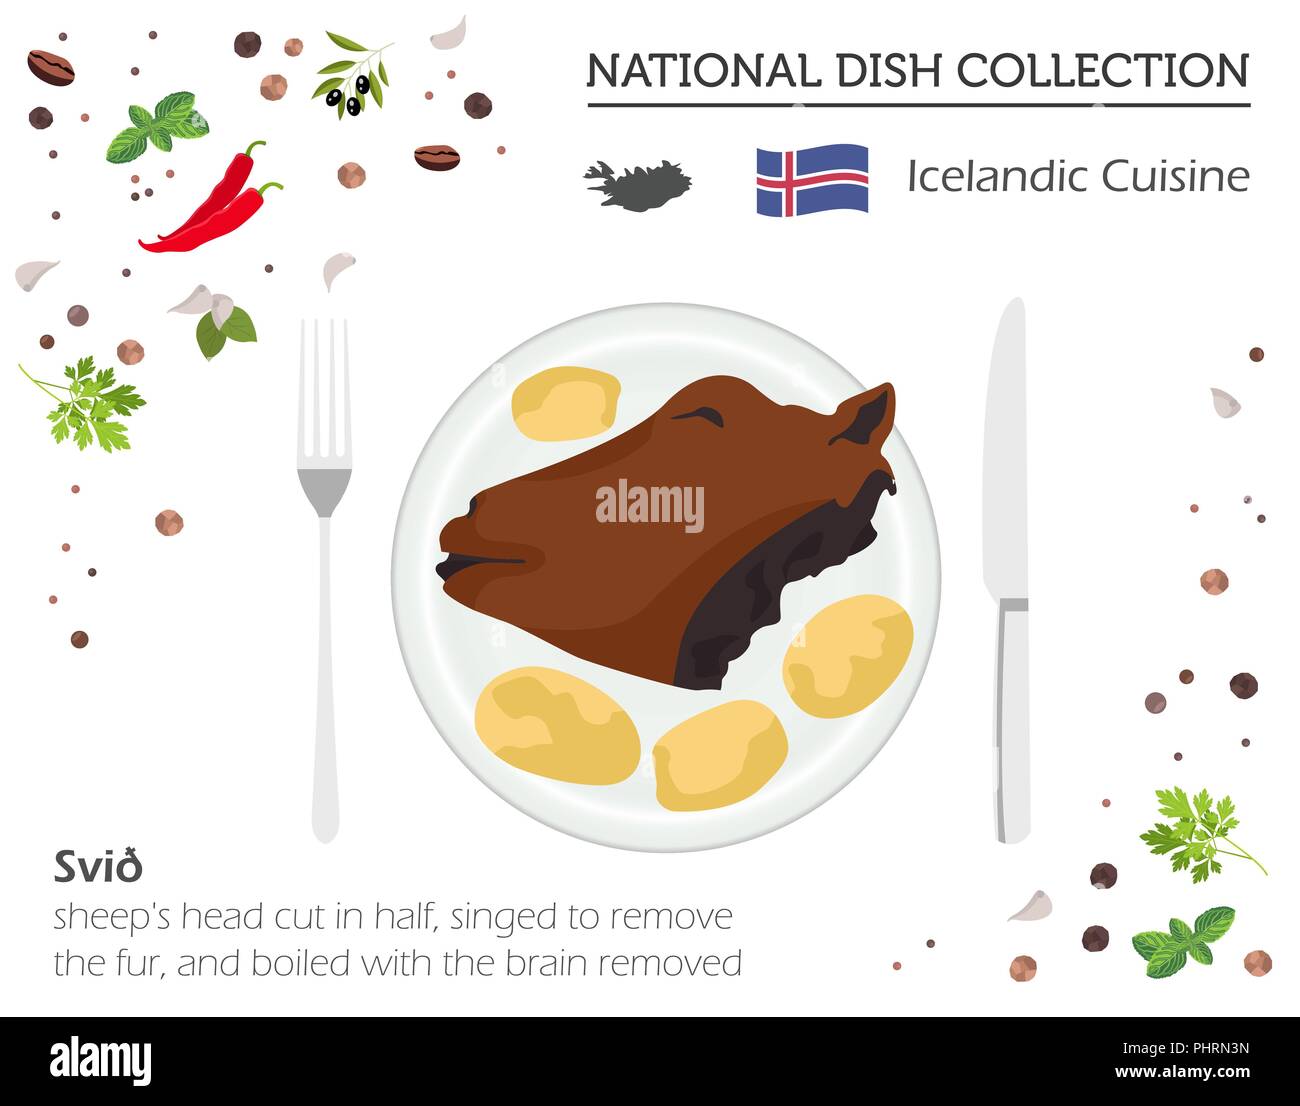 Icelandic Cuisine. European national dish collection. Sheep`s head cut in half isolated on white, infographic. Vector illustration Stock Vector